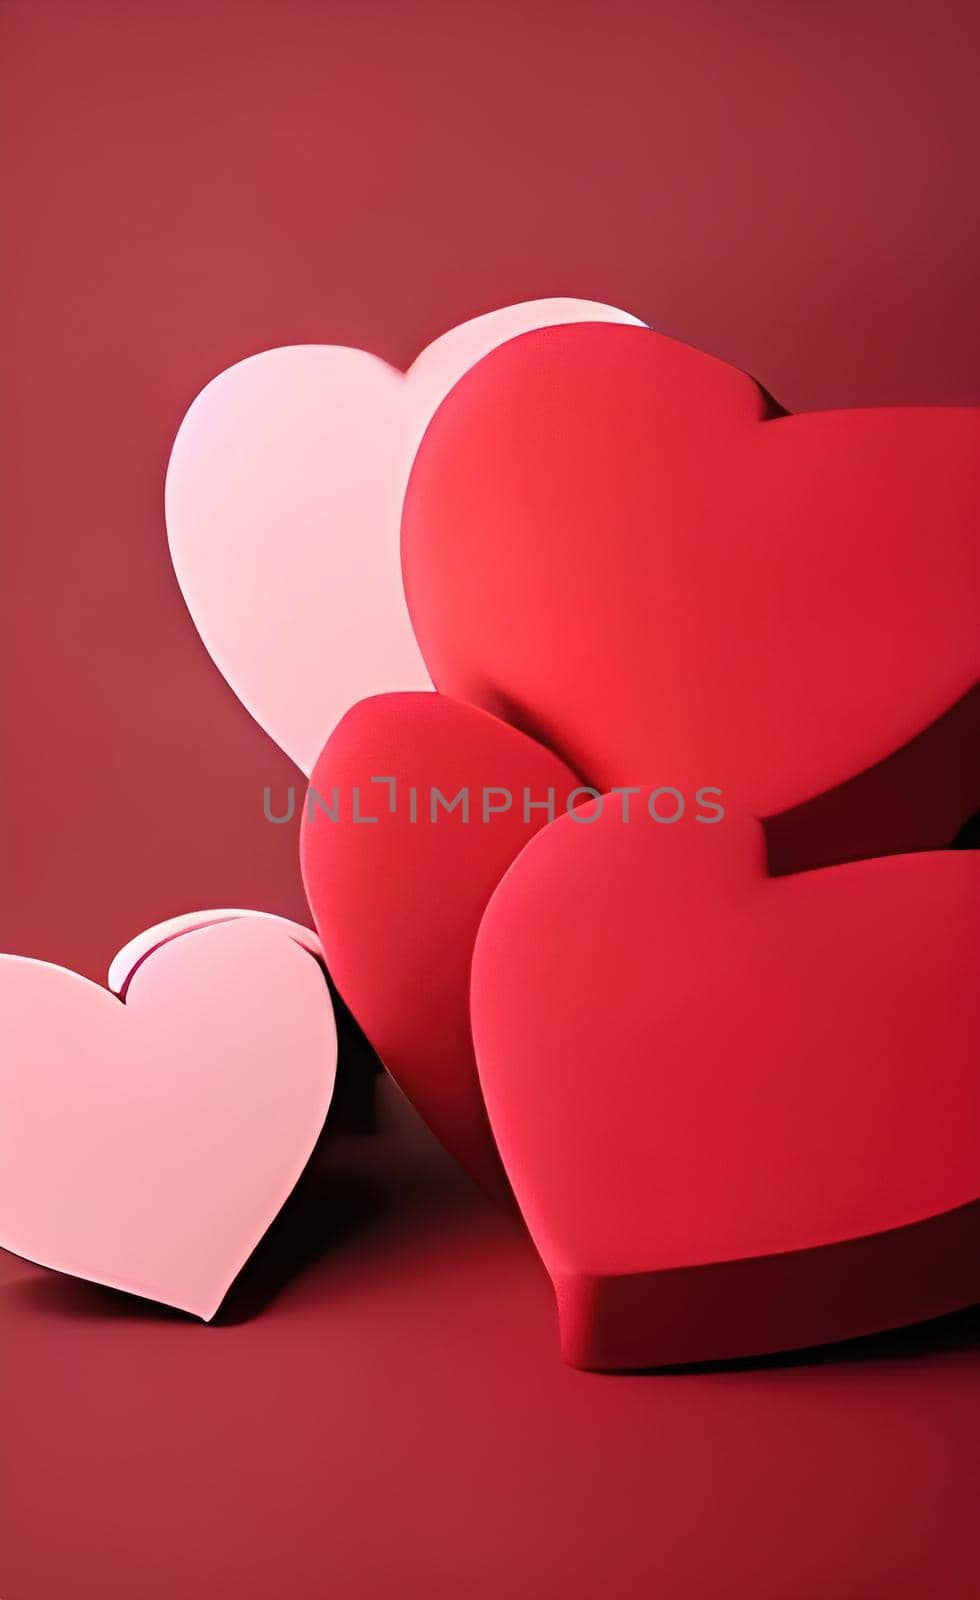 red hearts for special days and celebrations